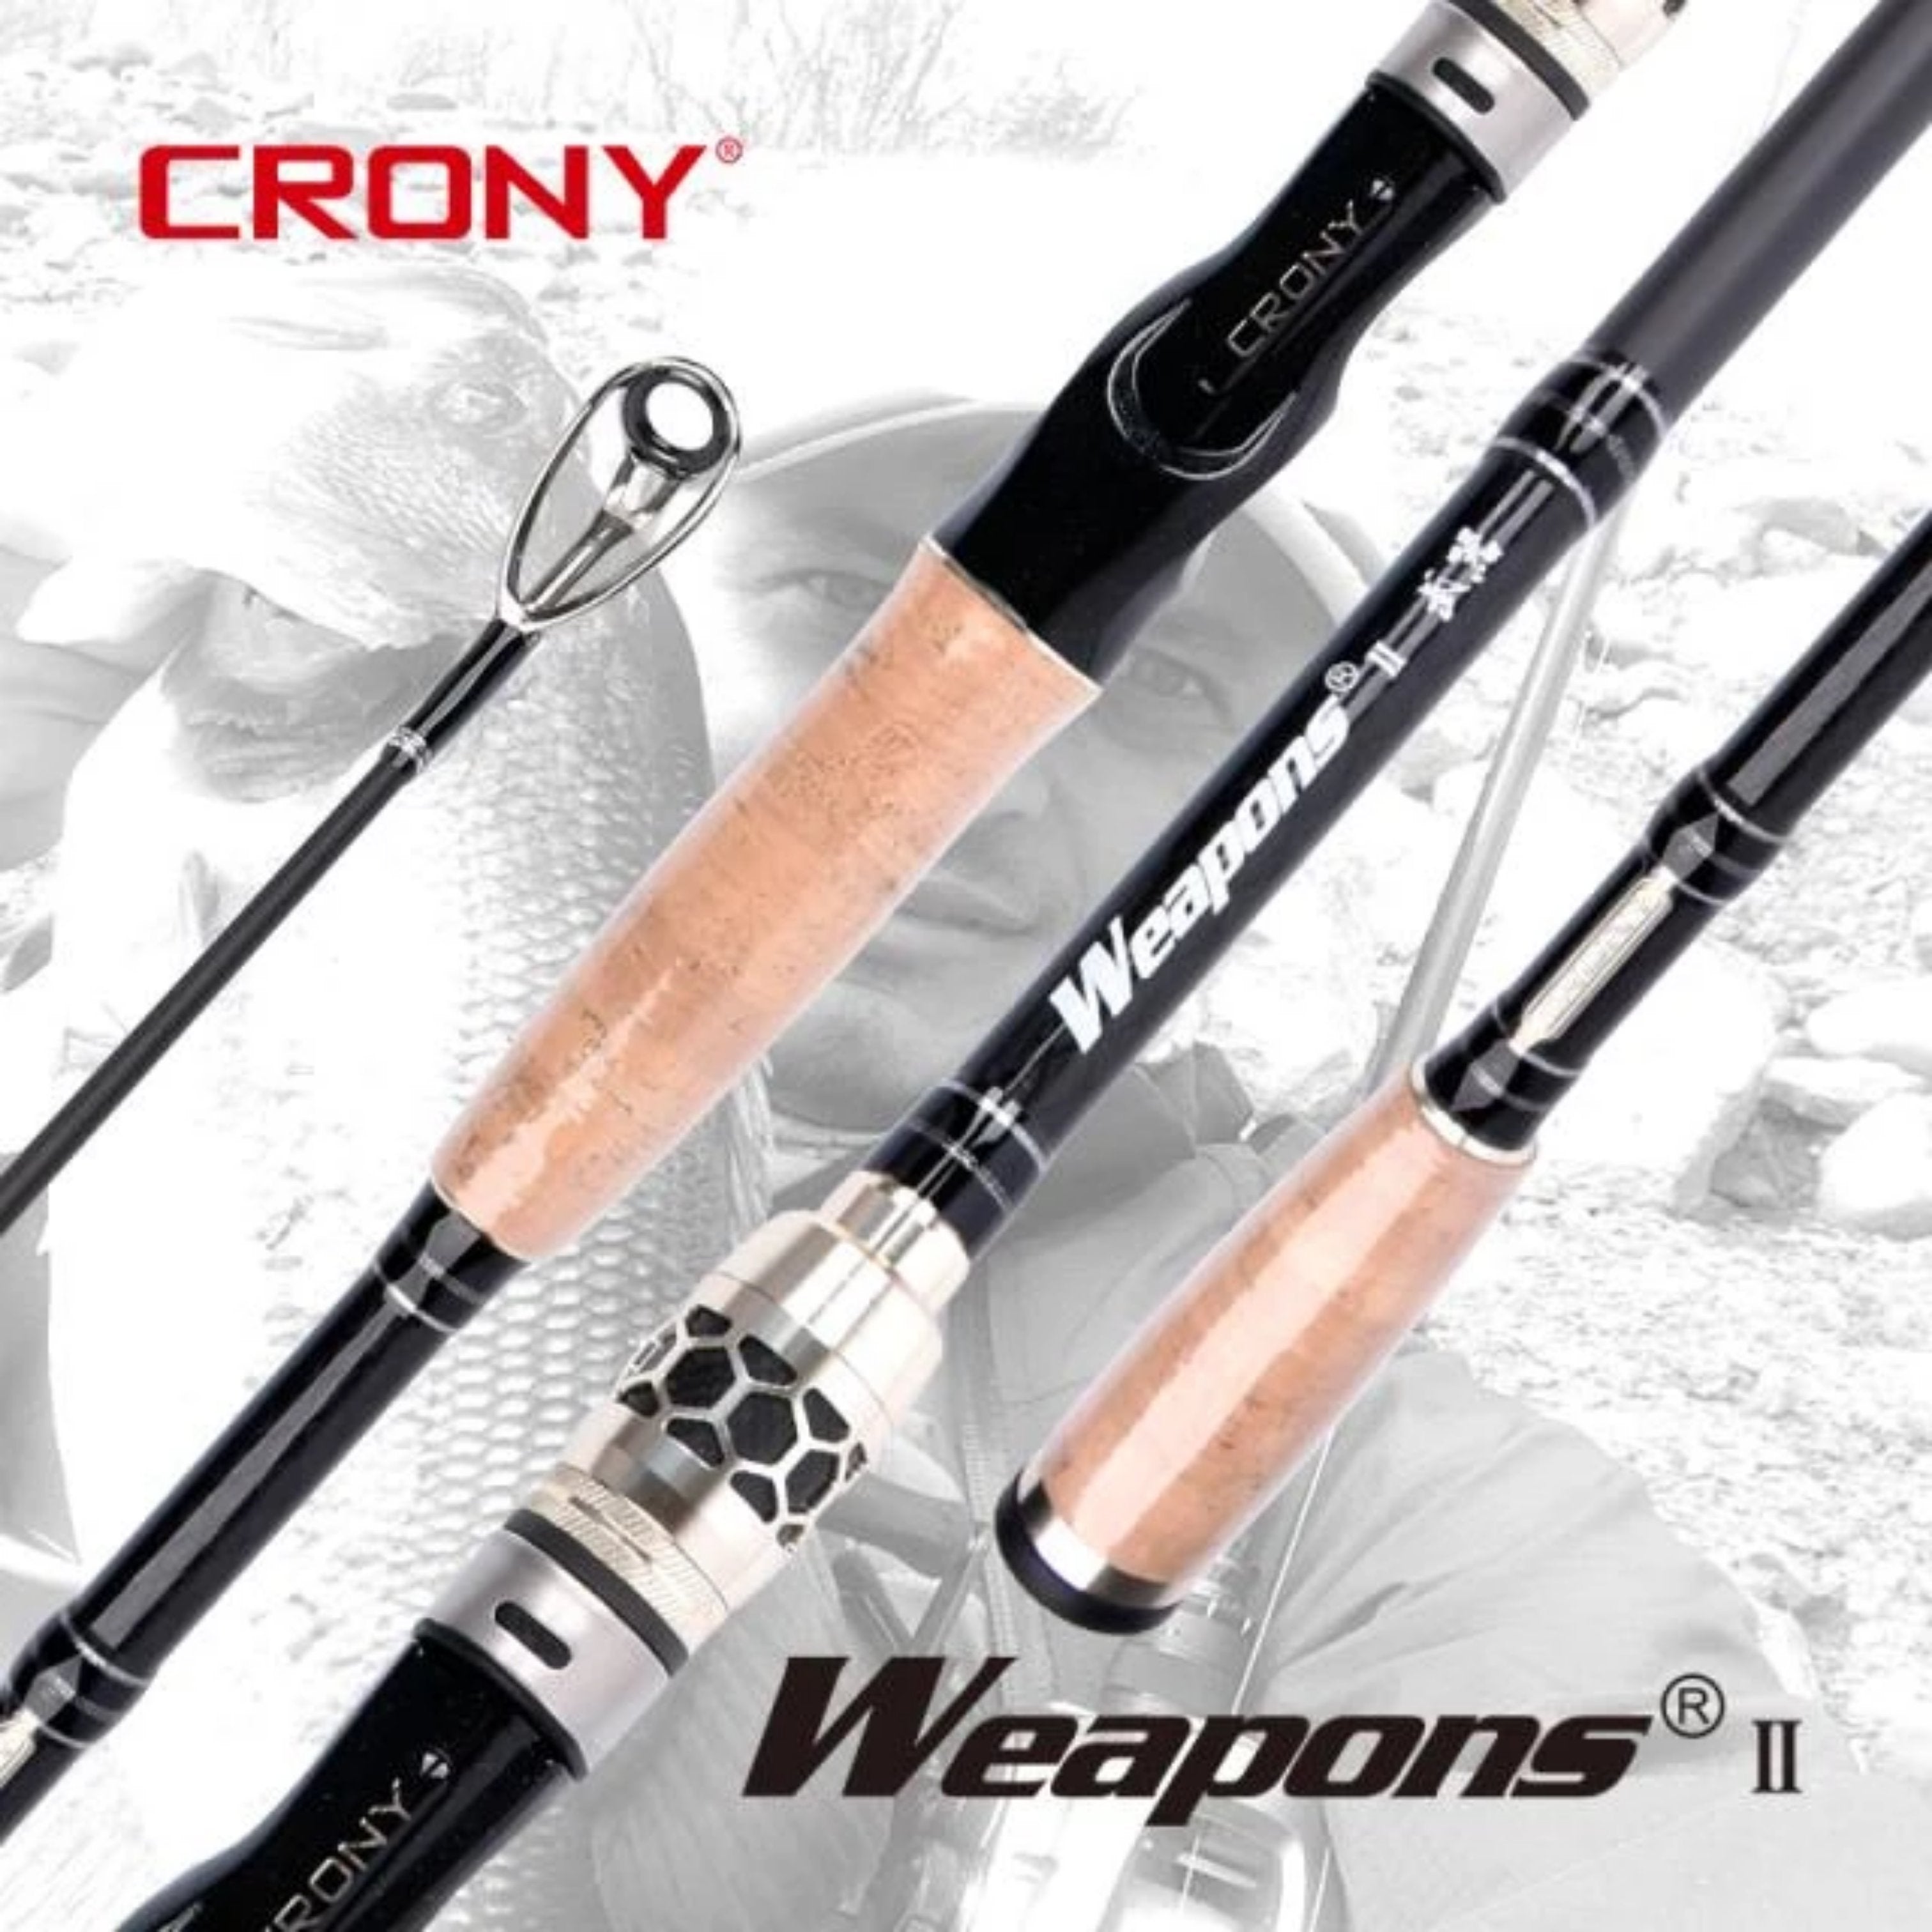 Fishing rod Crony Weapons II Spinning/Casting(Inside)